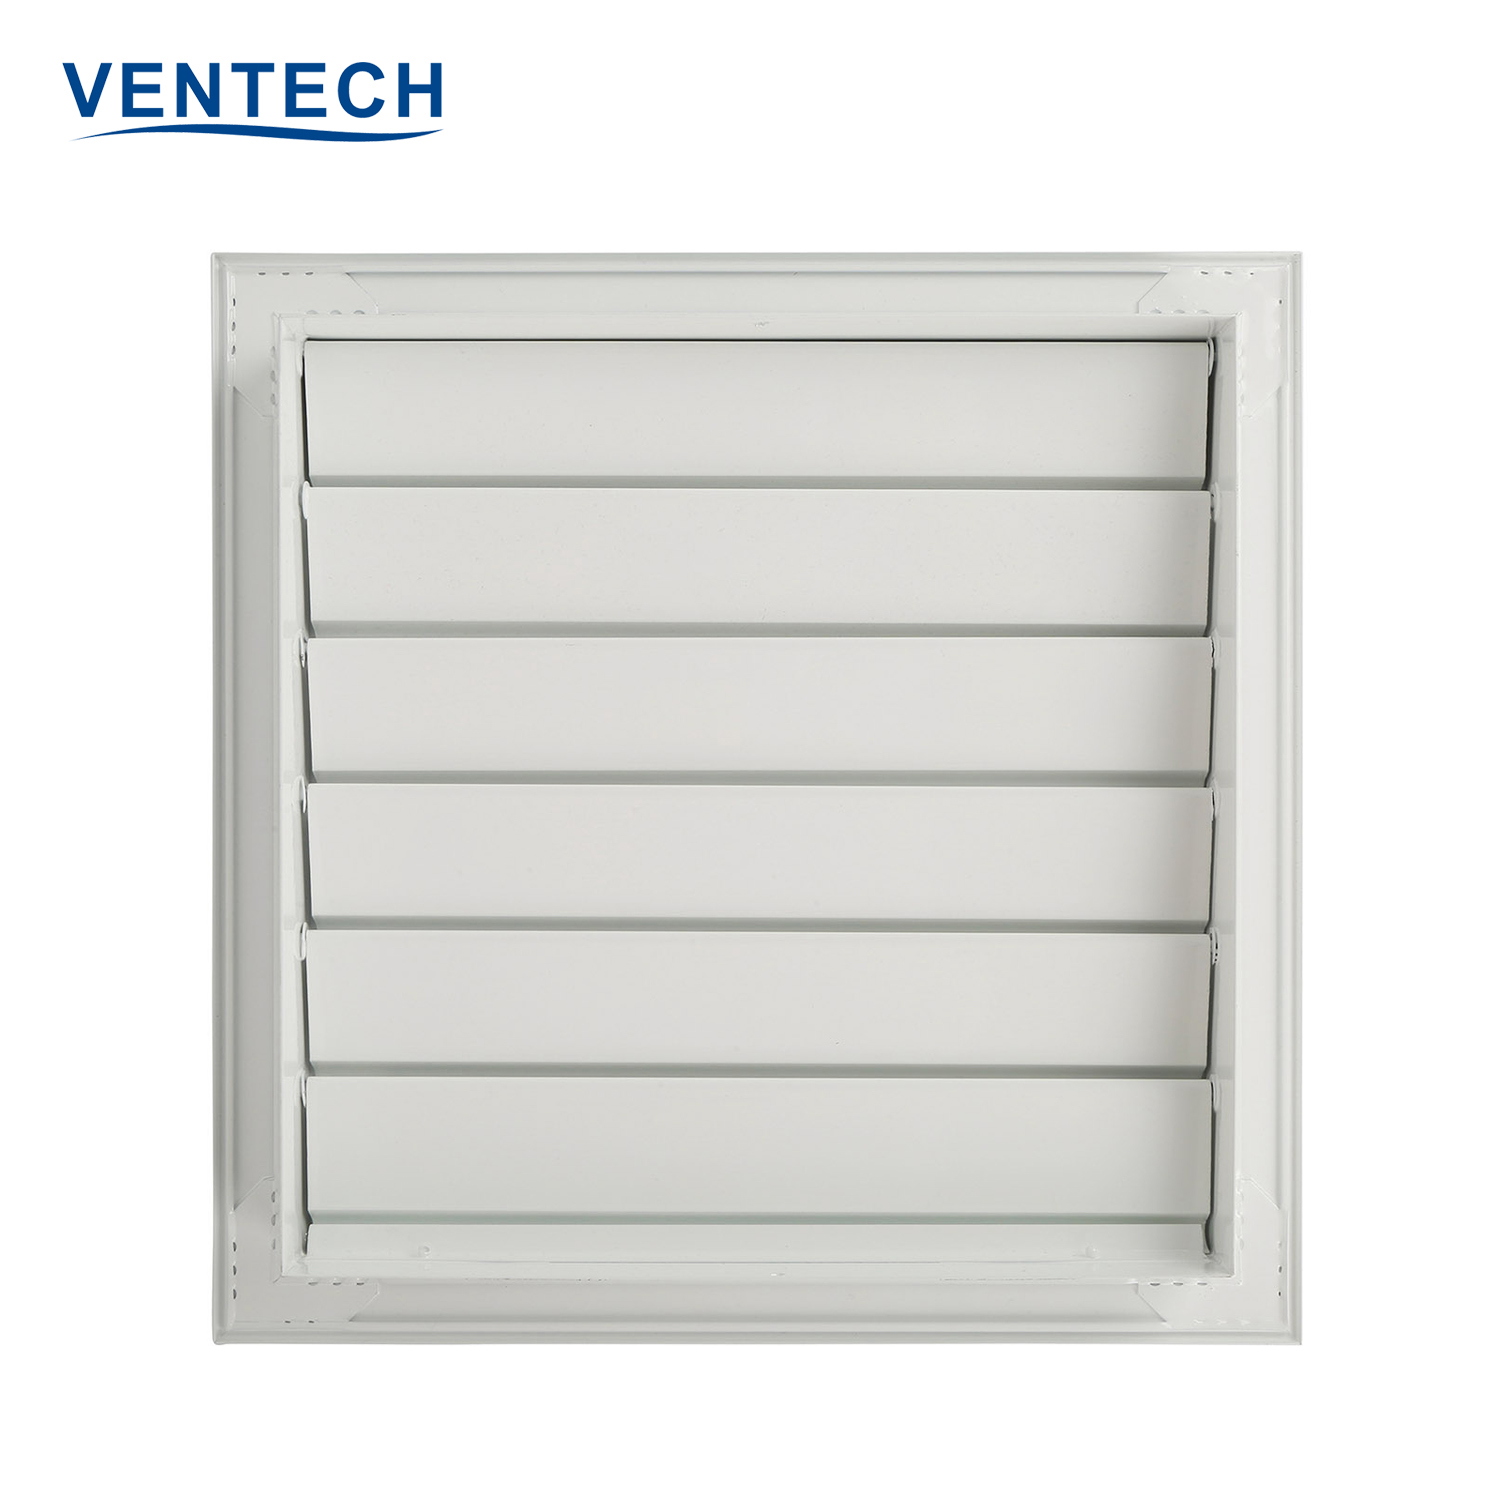 Ventech stainless steel louvers inquire now for large public areas-1